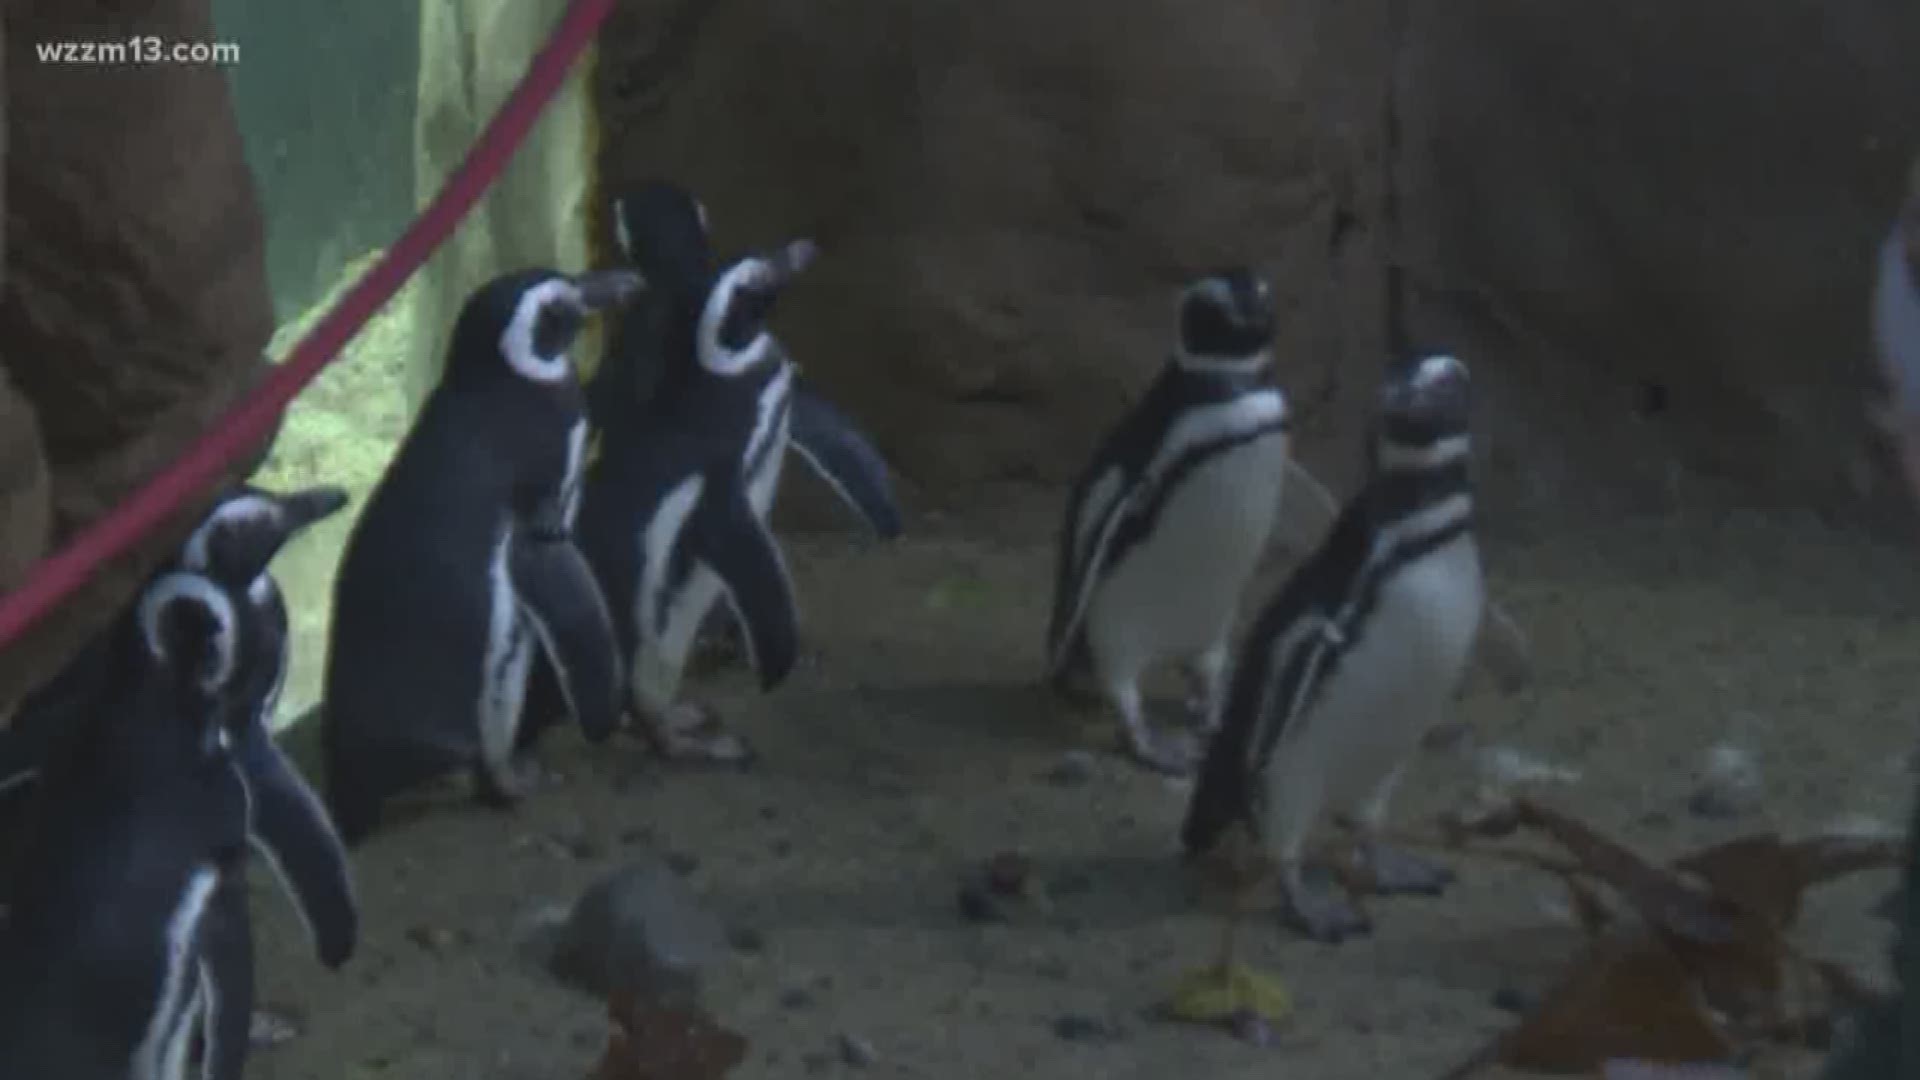 The Zoo will have World Penguin Day on Thursday, April 25, and Party for the Planet on Saturday, April 27.